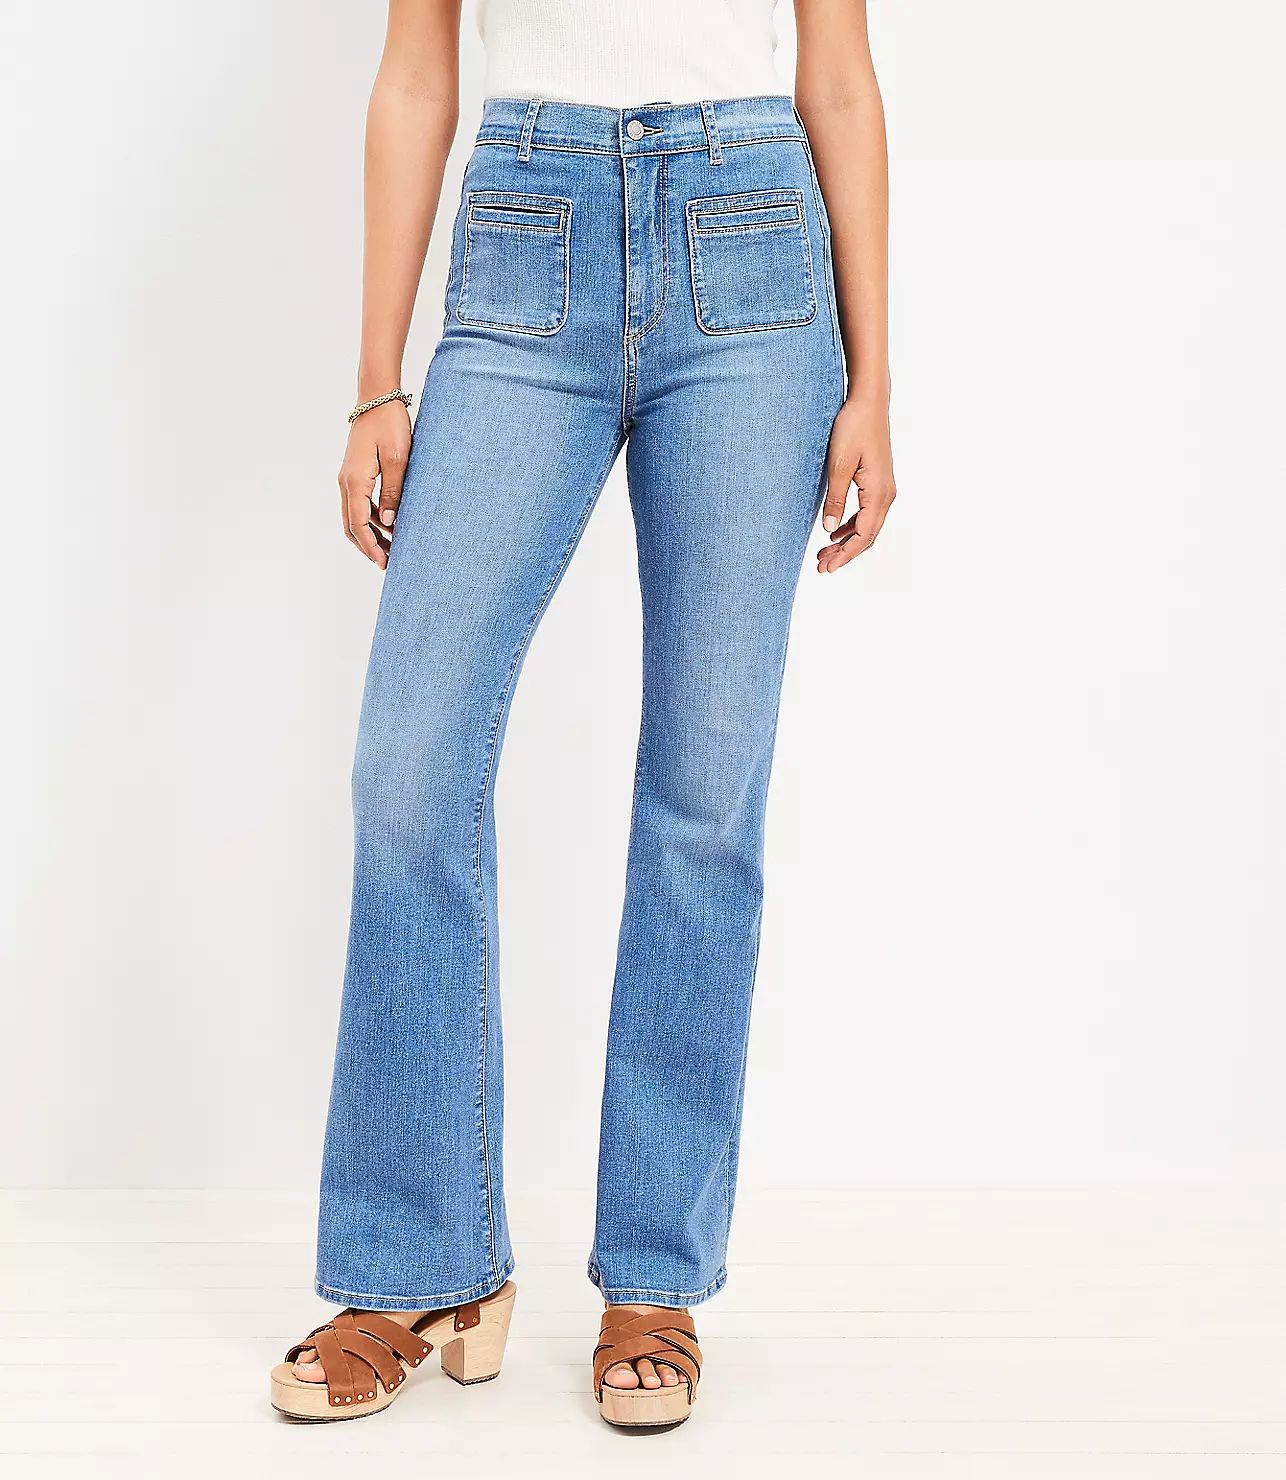 Welt Patch Pocket High Rise Slim Flare Jeans in Luxe Medium Wash | LOFT